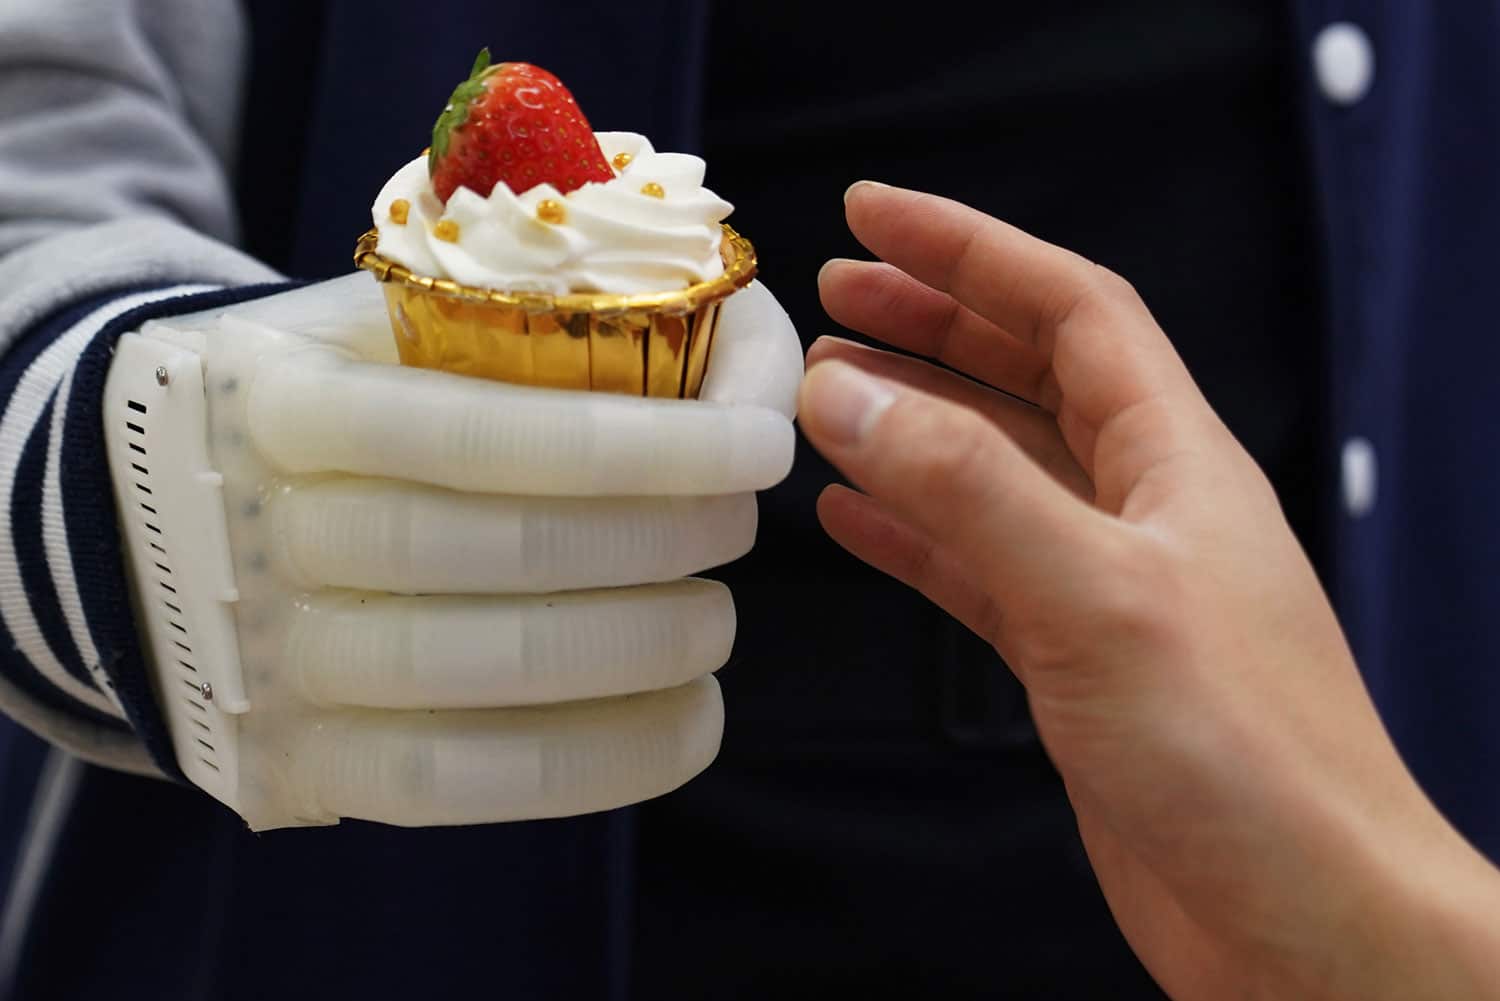 An inflatable robotic hand gives amputees real-time tactile control.